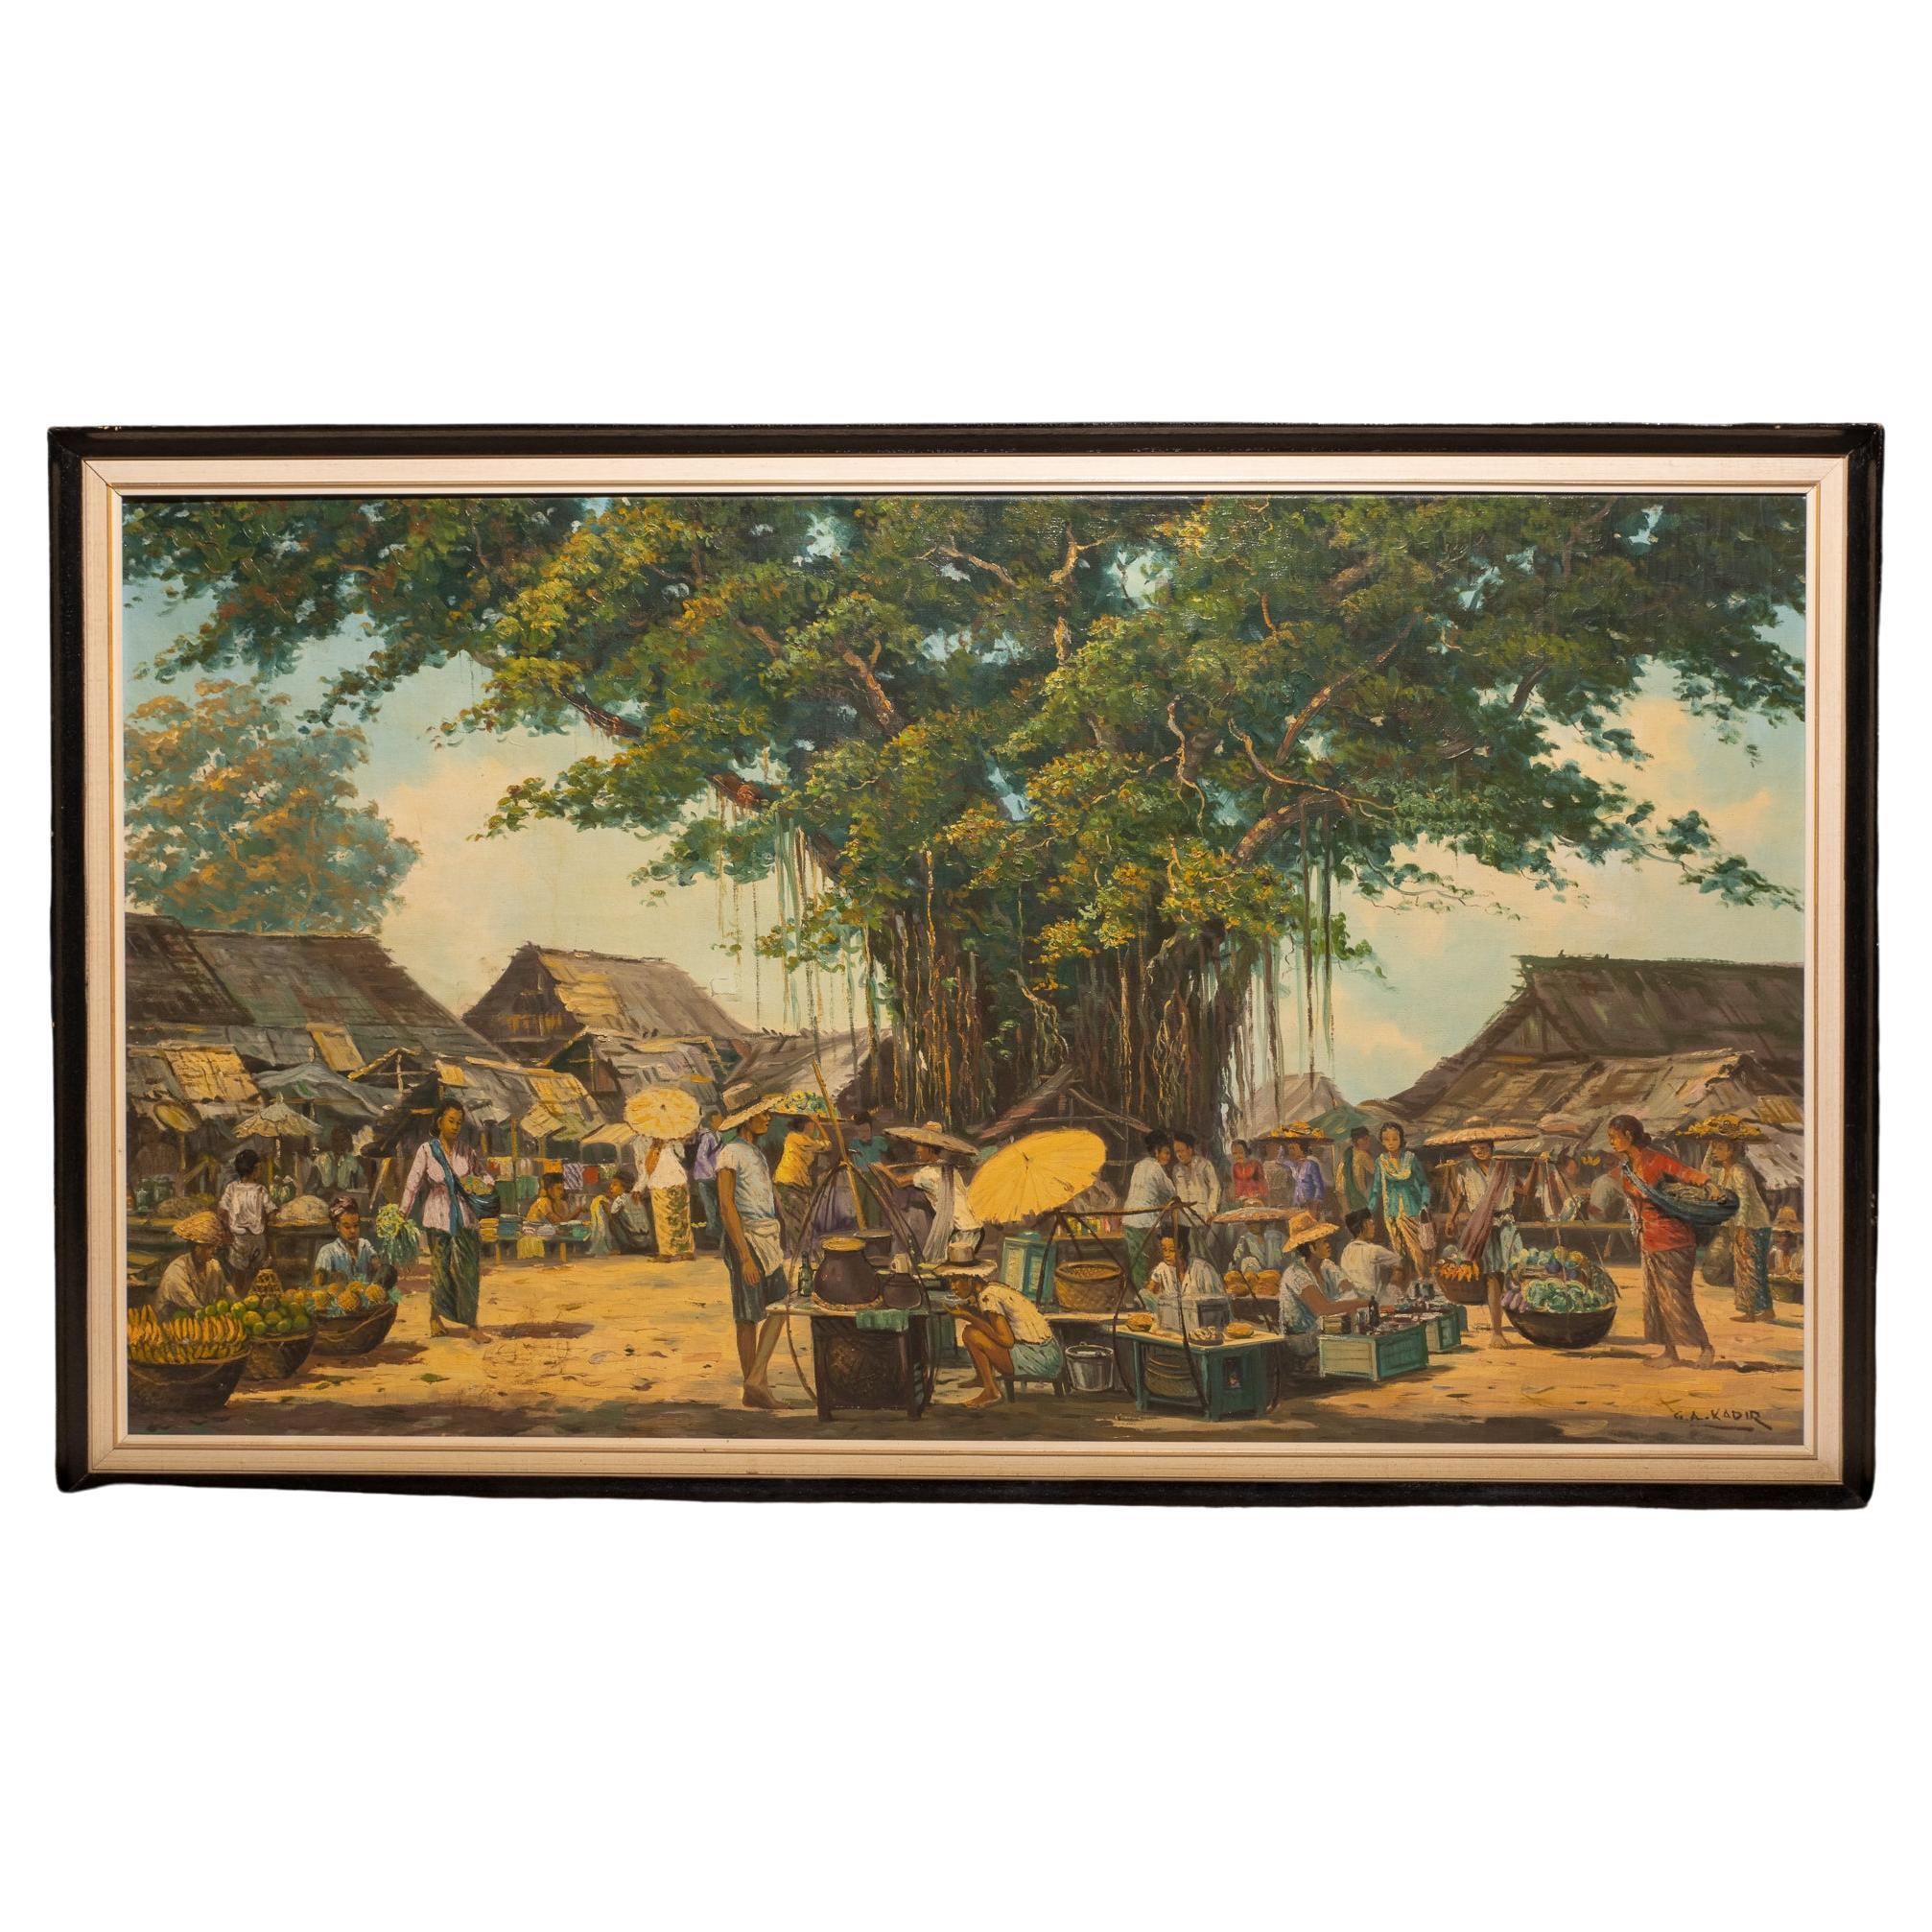 Original oil painting by the Indonesian impressionist painter G.A. Kadir: educated as a painter by the Danish van Russel (1898 - 1975) and active in the first half of the 20th century in Bogor (West Java). Signed on the bottom right: 